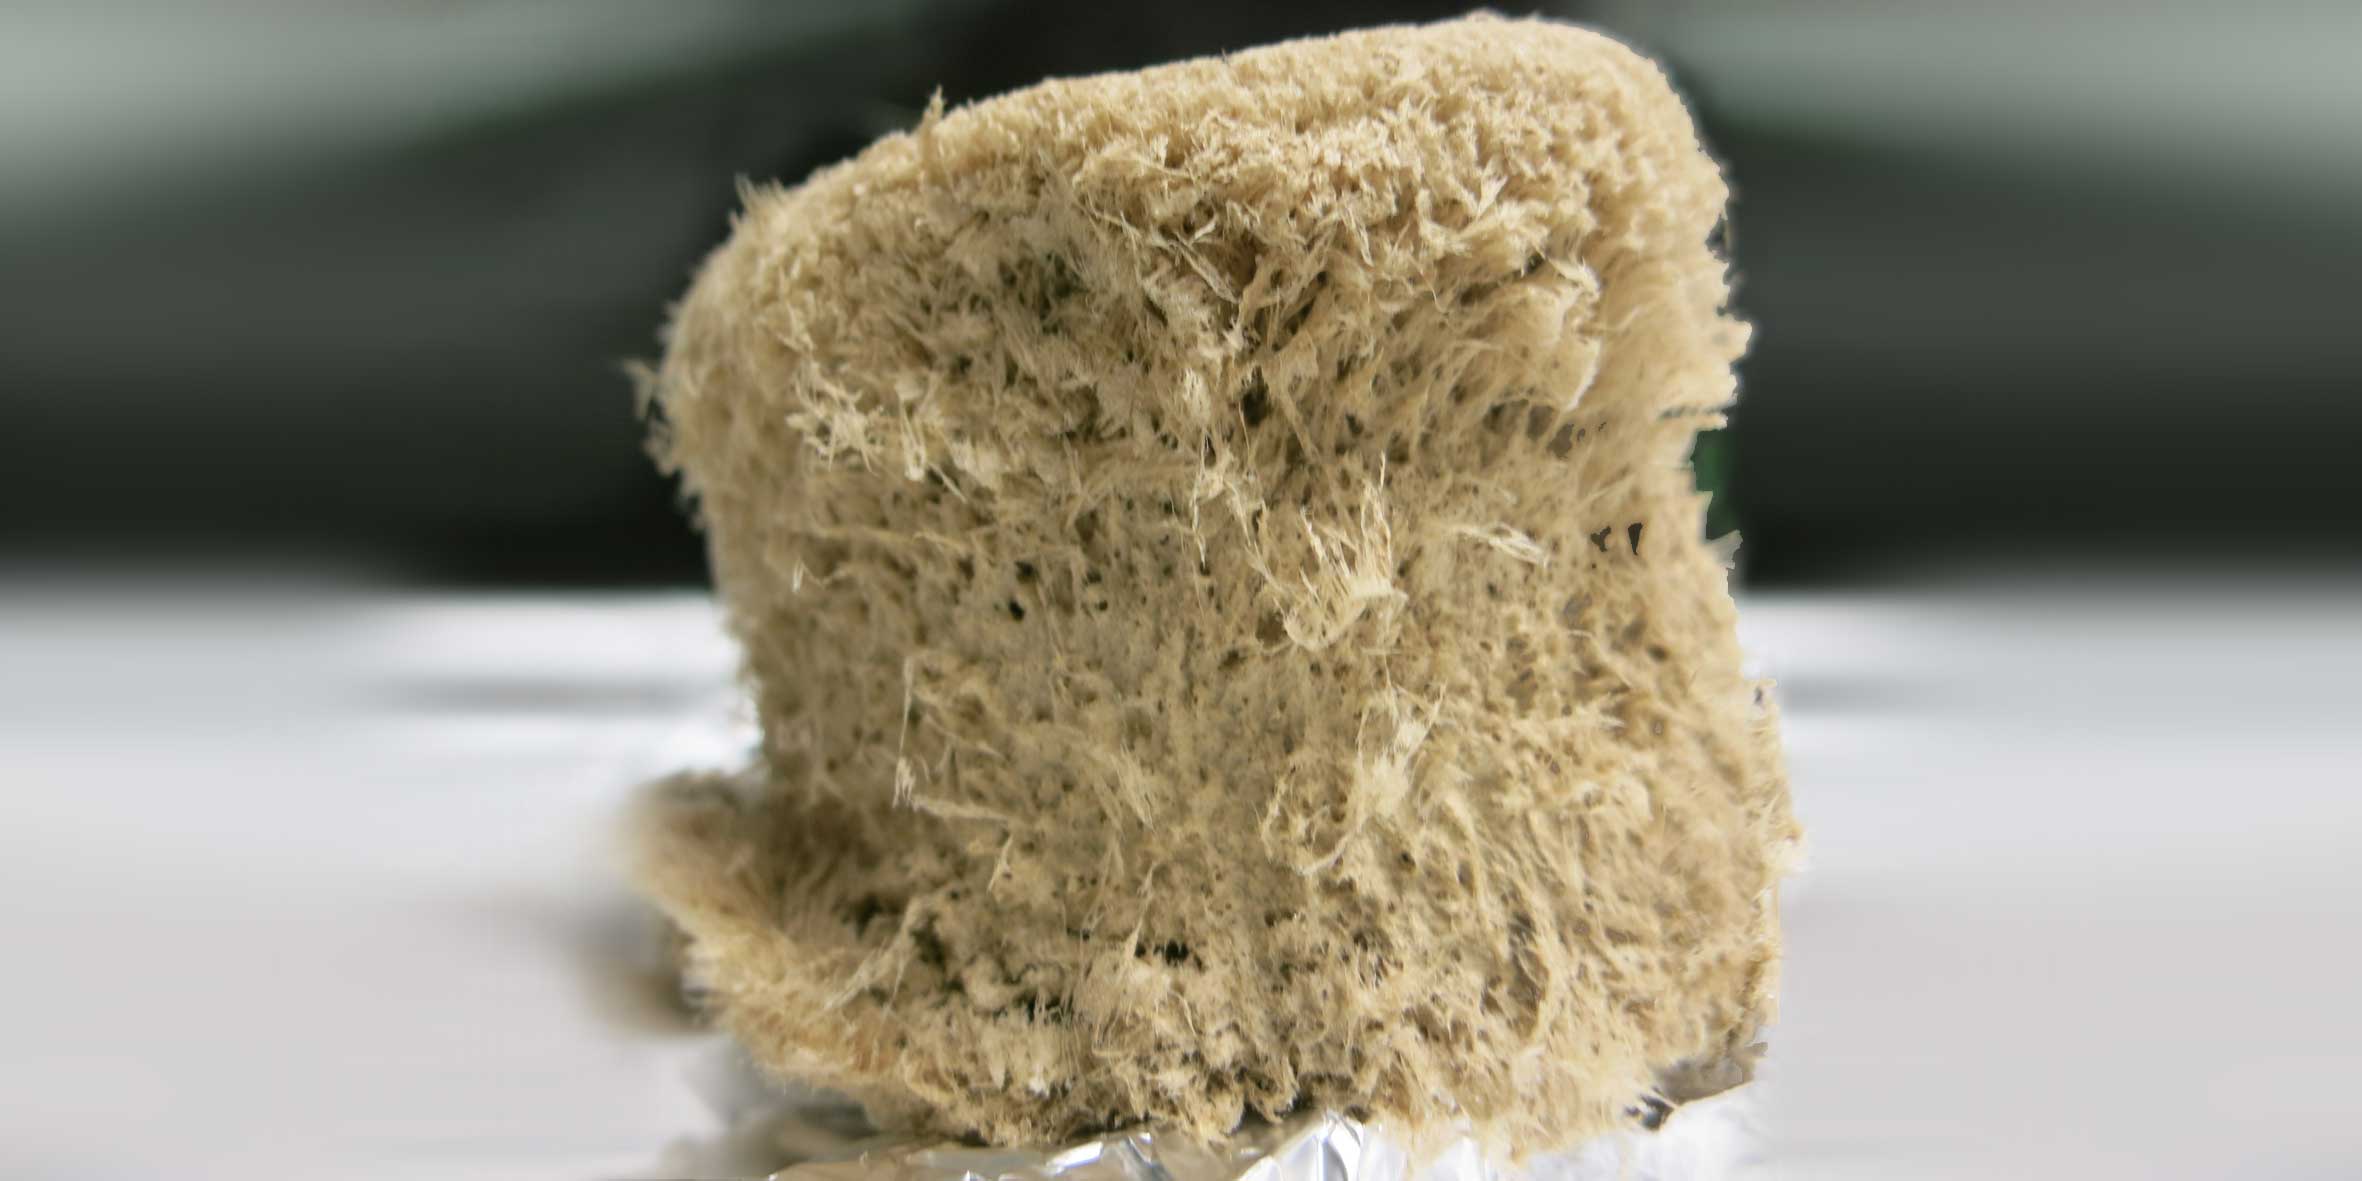 Instead of plastic: Biodegradable materials made from wood components